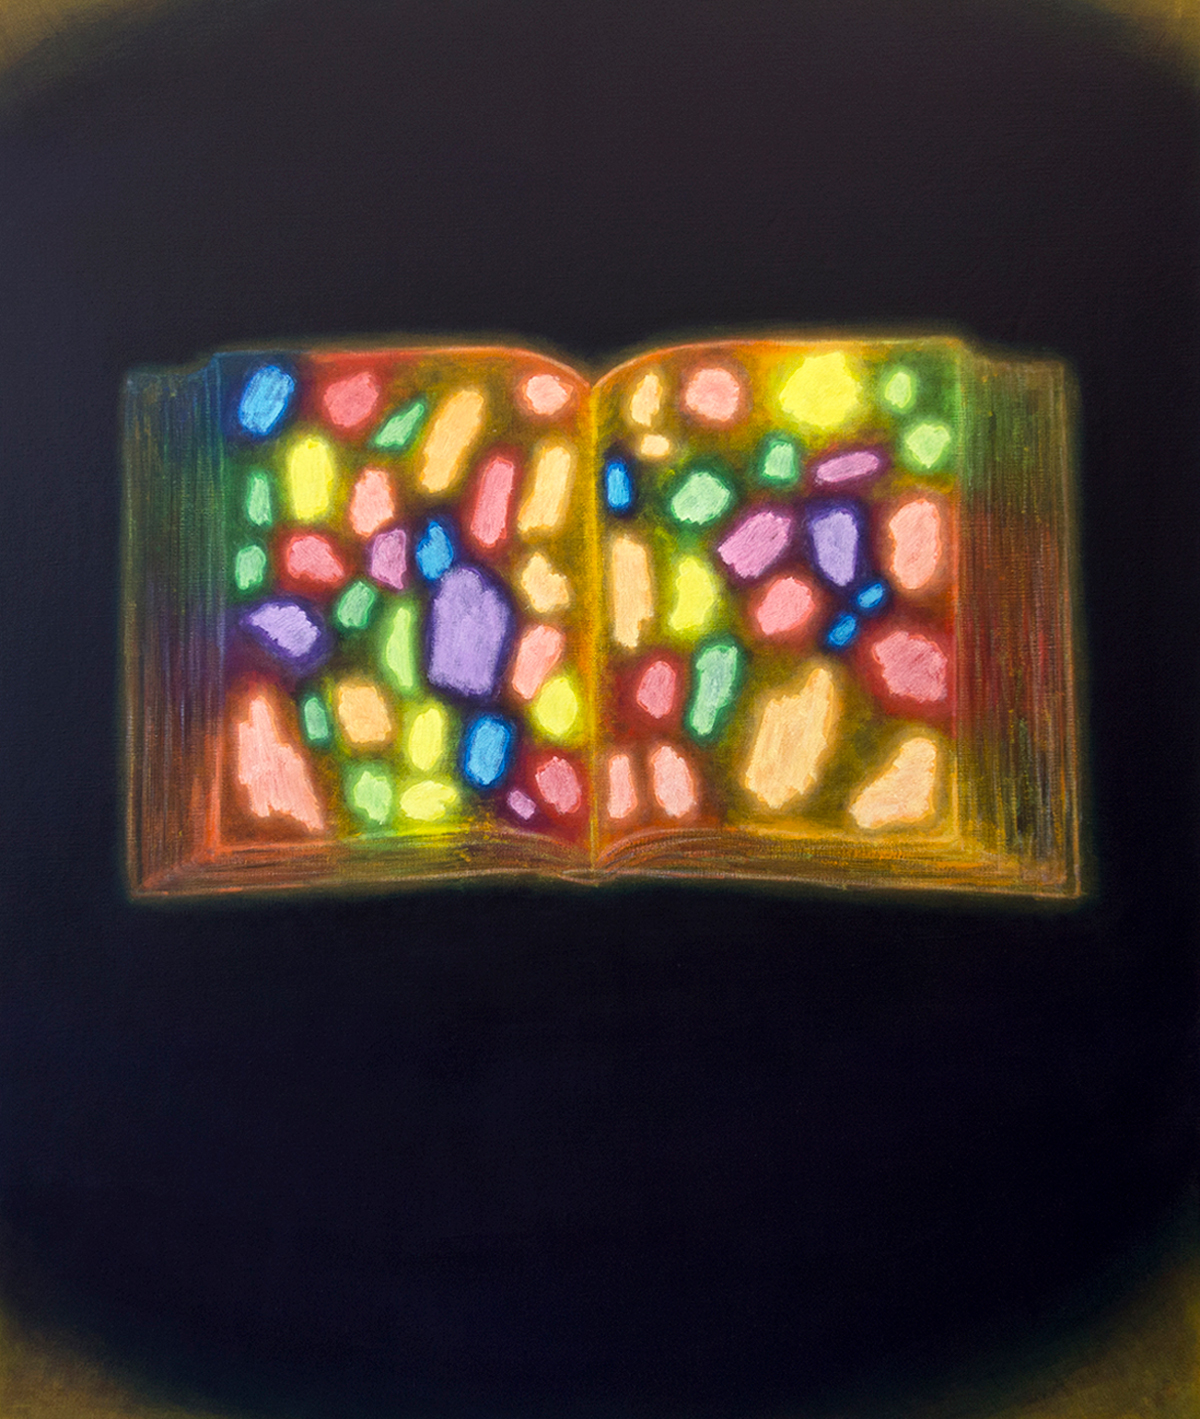 An open yellow book filled with glowing spots of paint in various colors against a black background